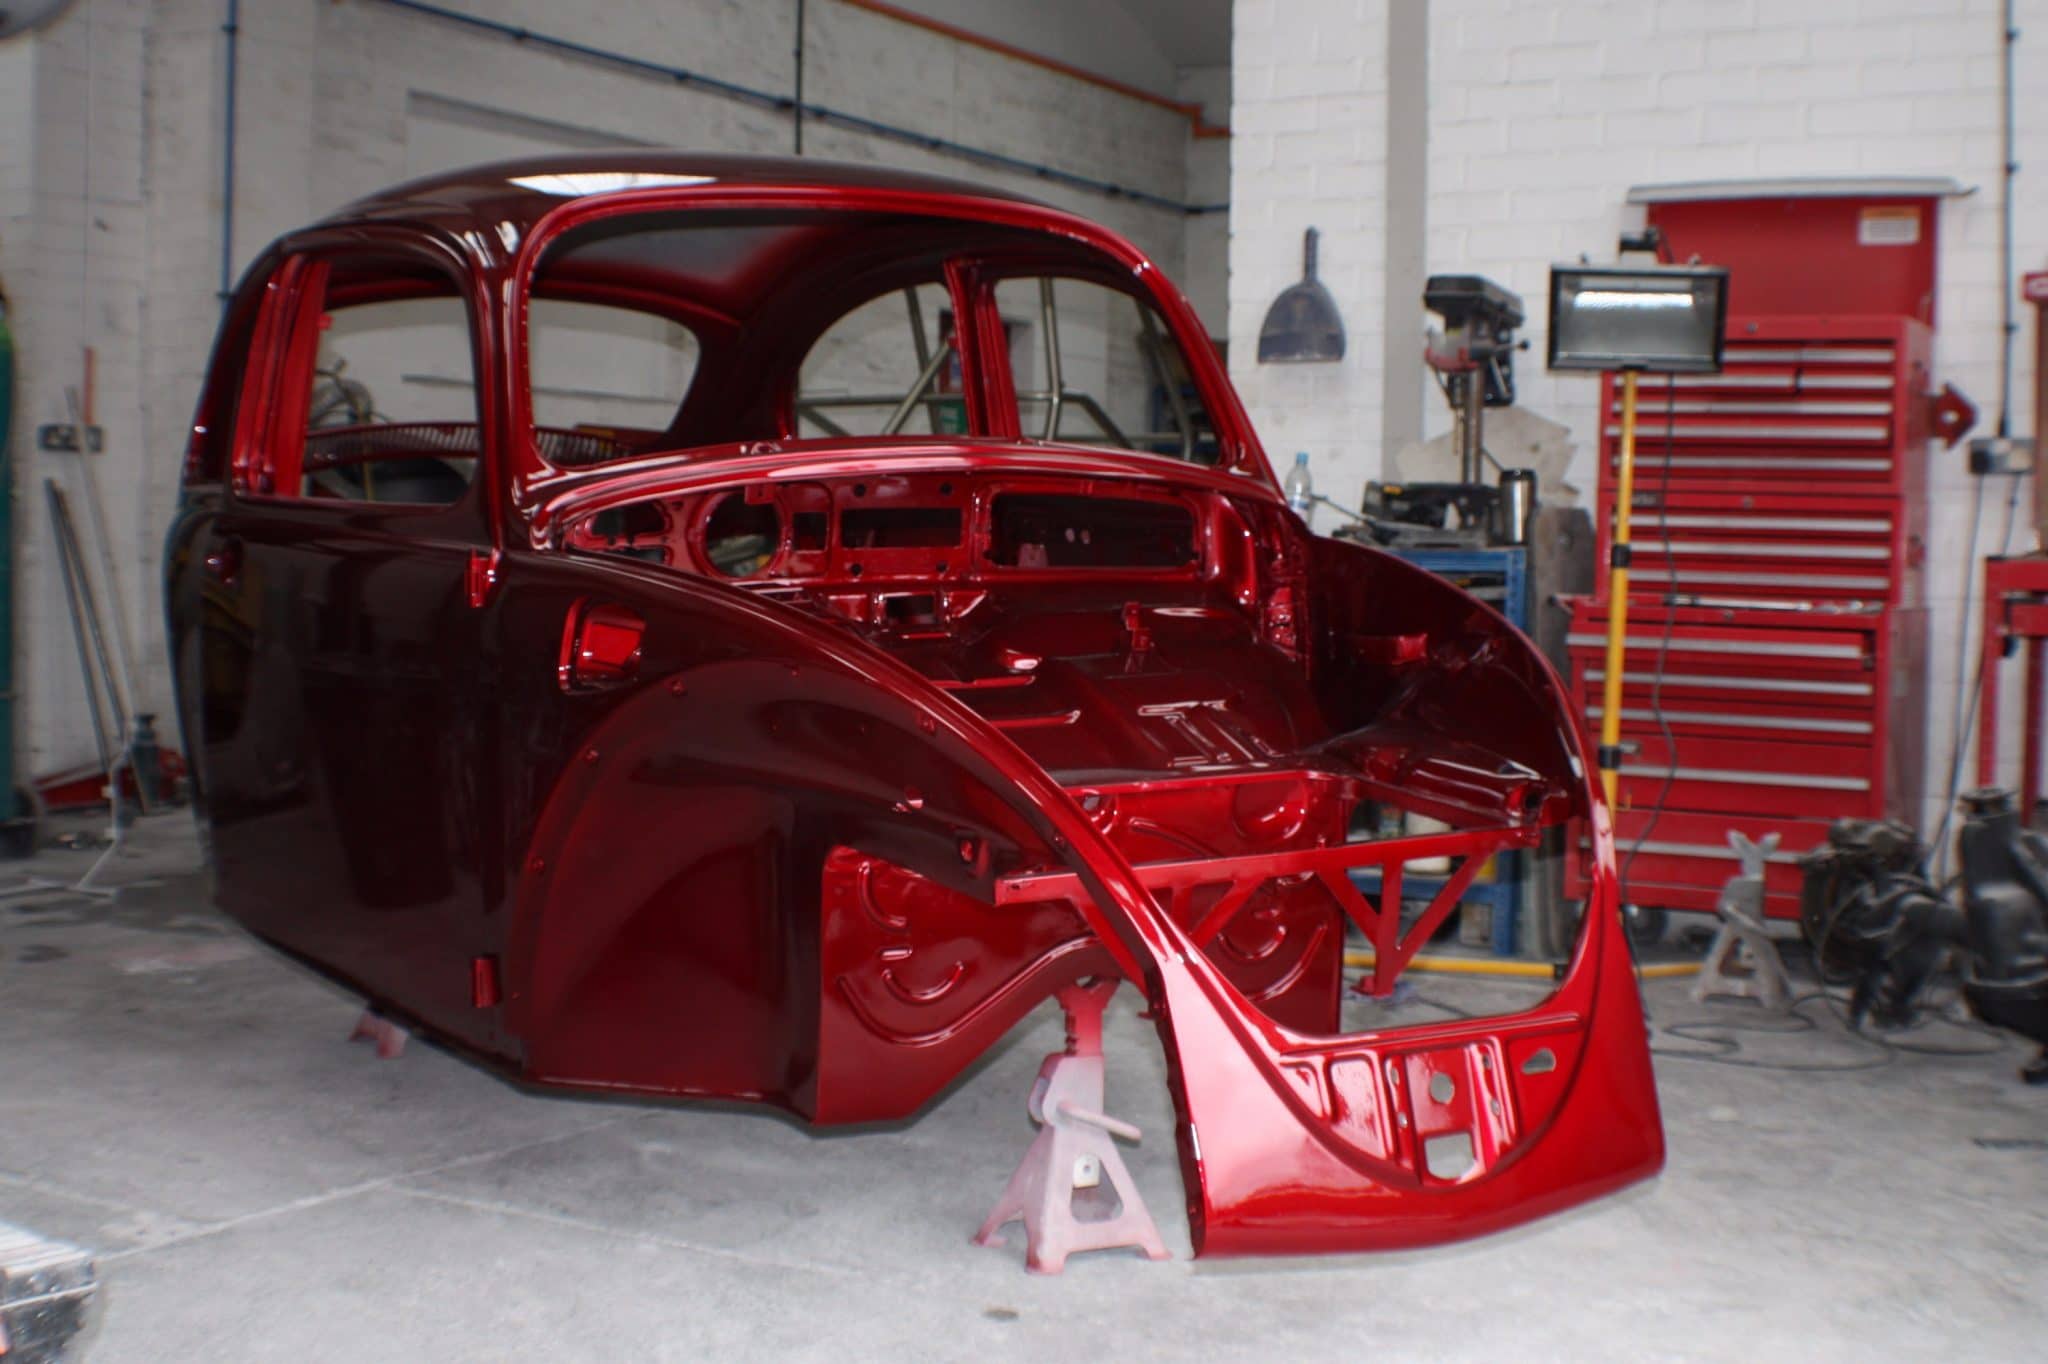 Beetle paint protection film in workshop - red